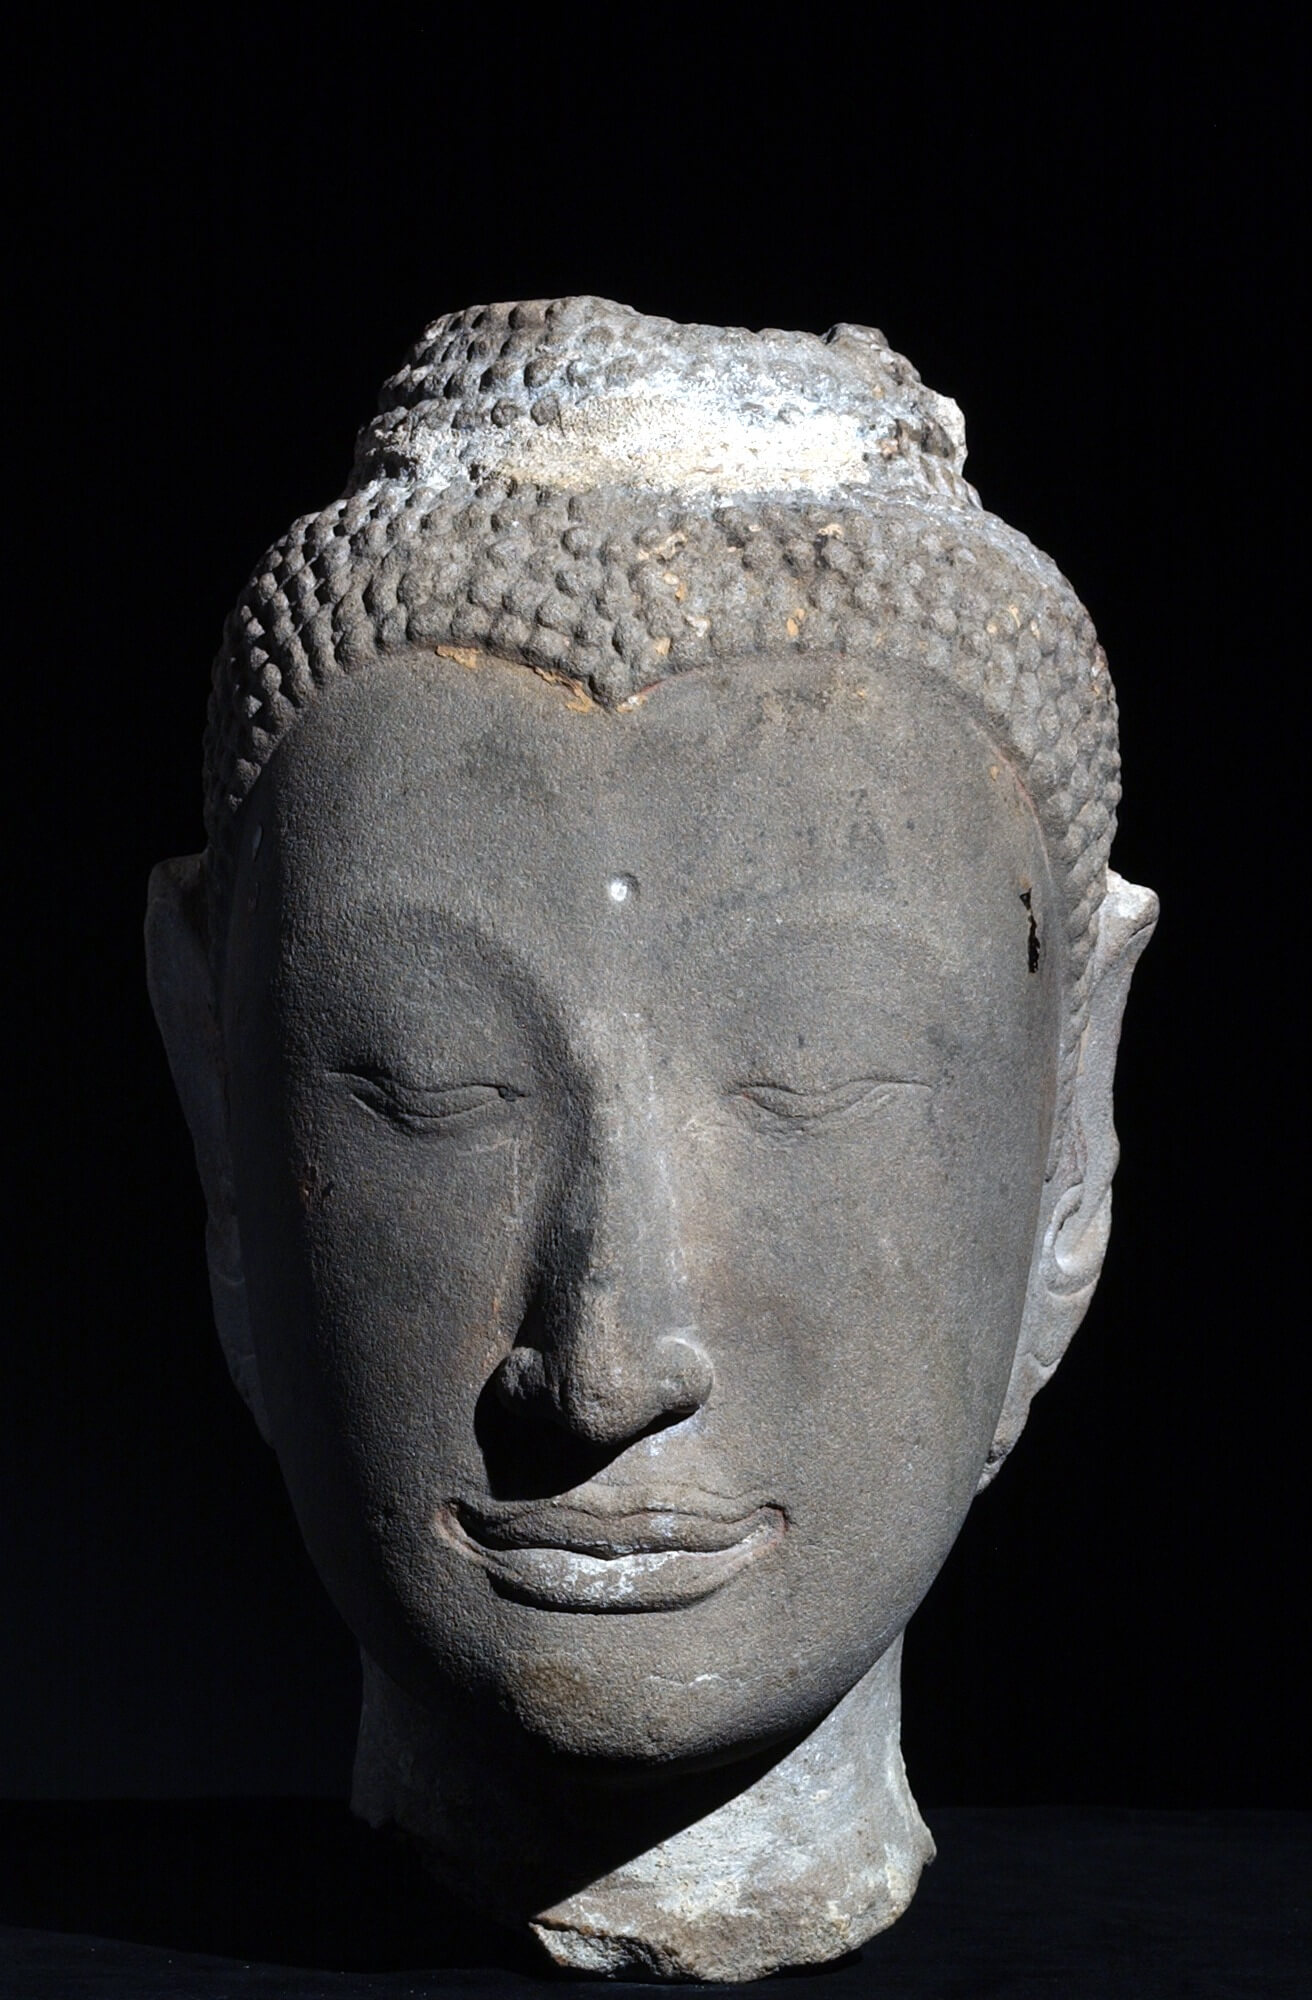 This stone head from Thailand, dating from between the 16th and 17th centuries, will be on display for the first time in the “Tai Cultures” exhibit.